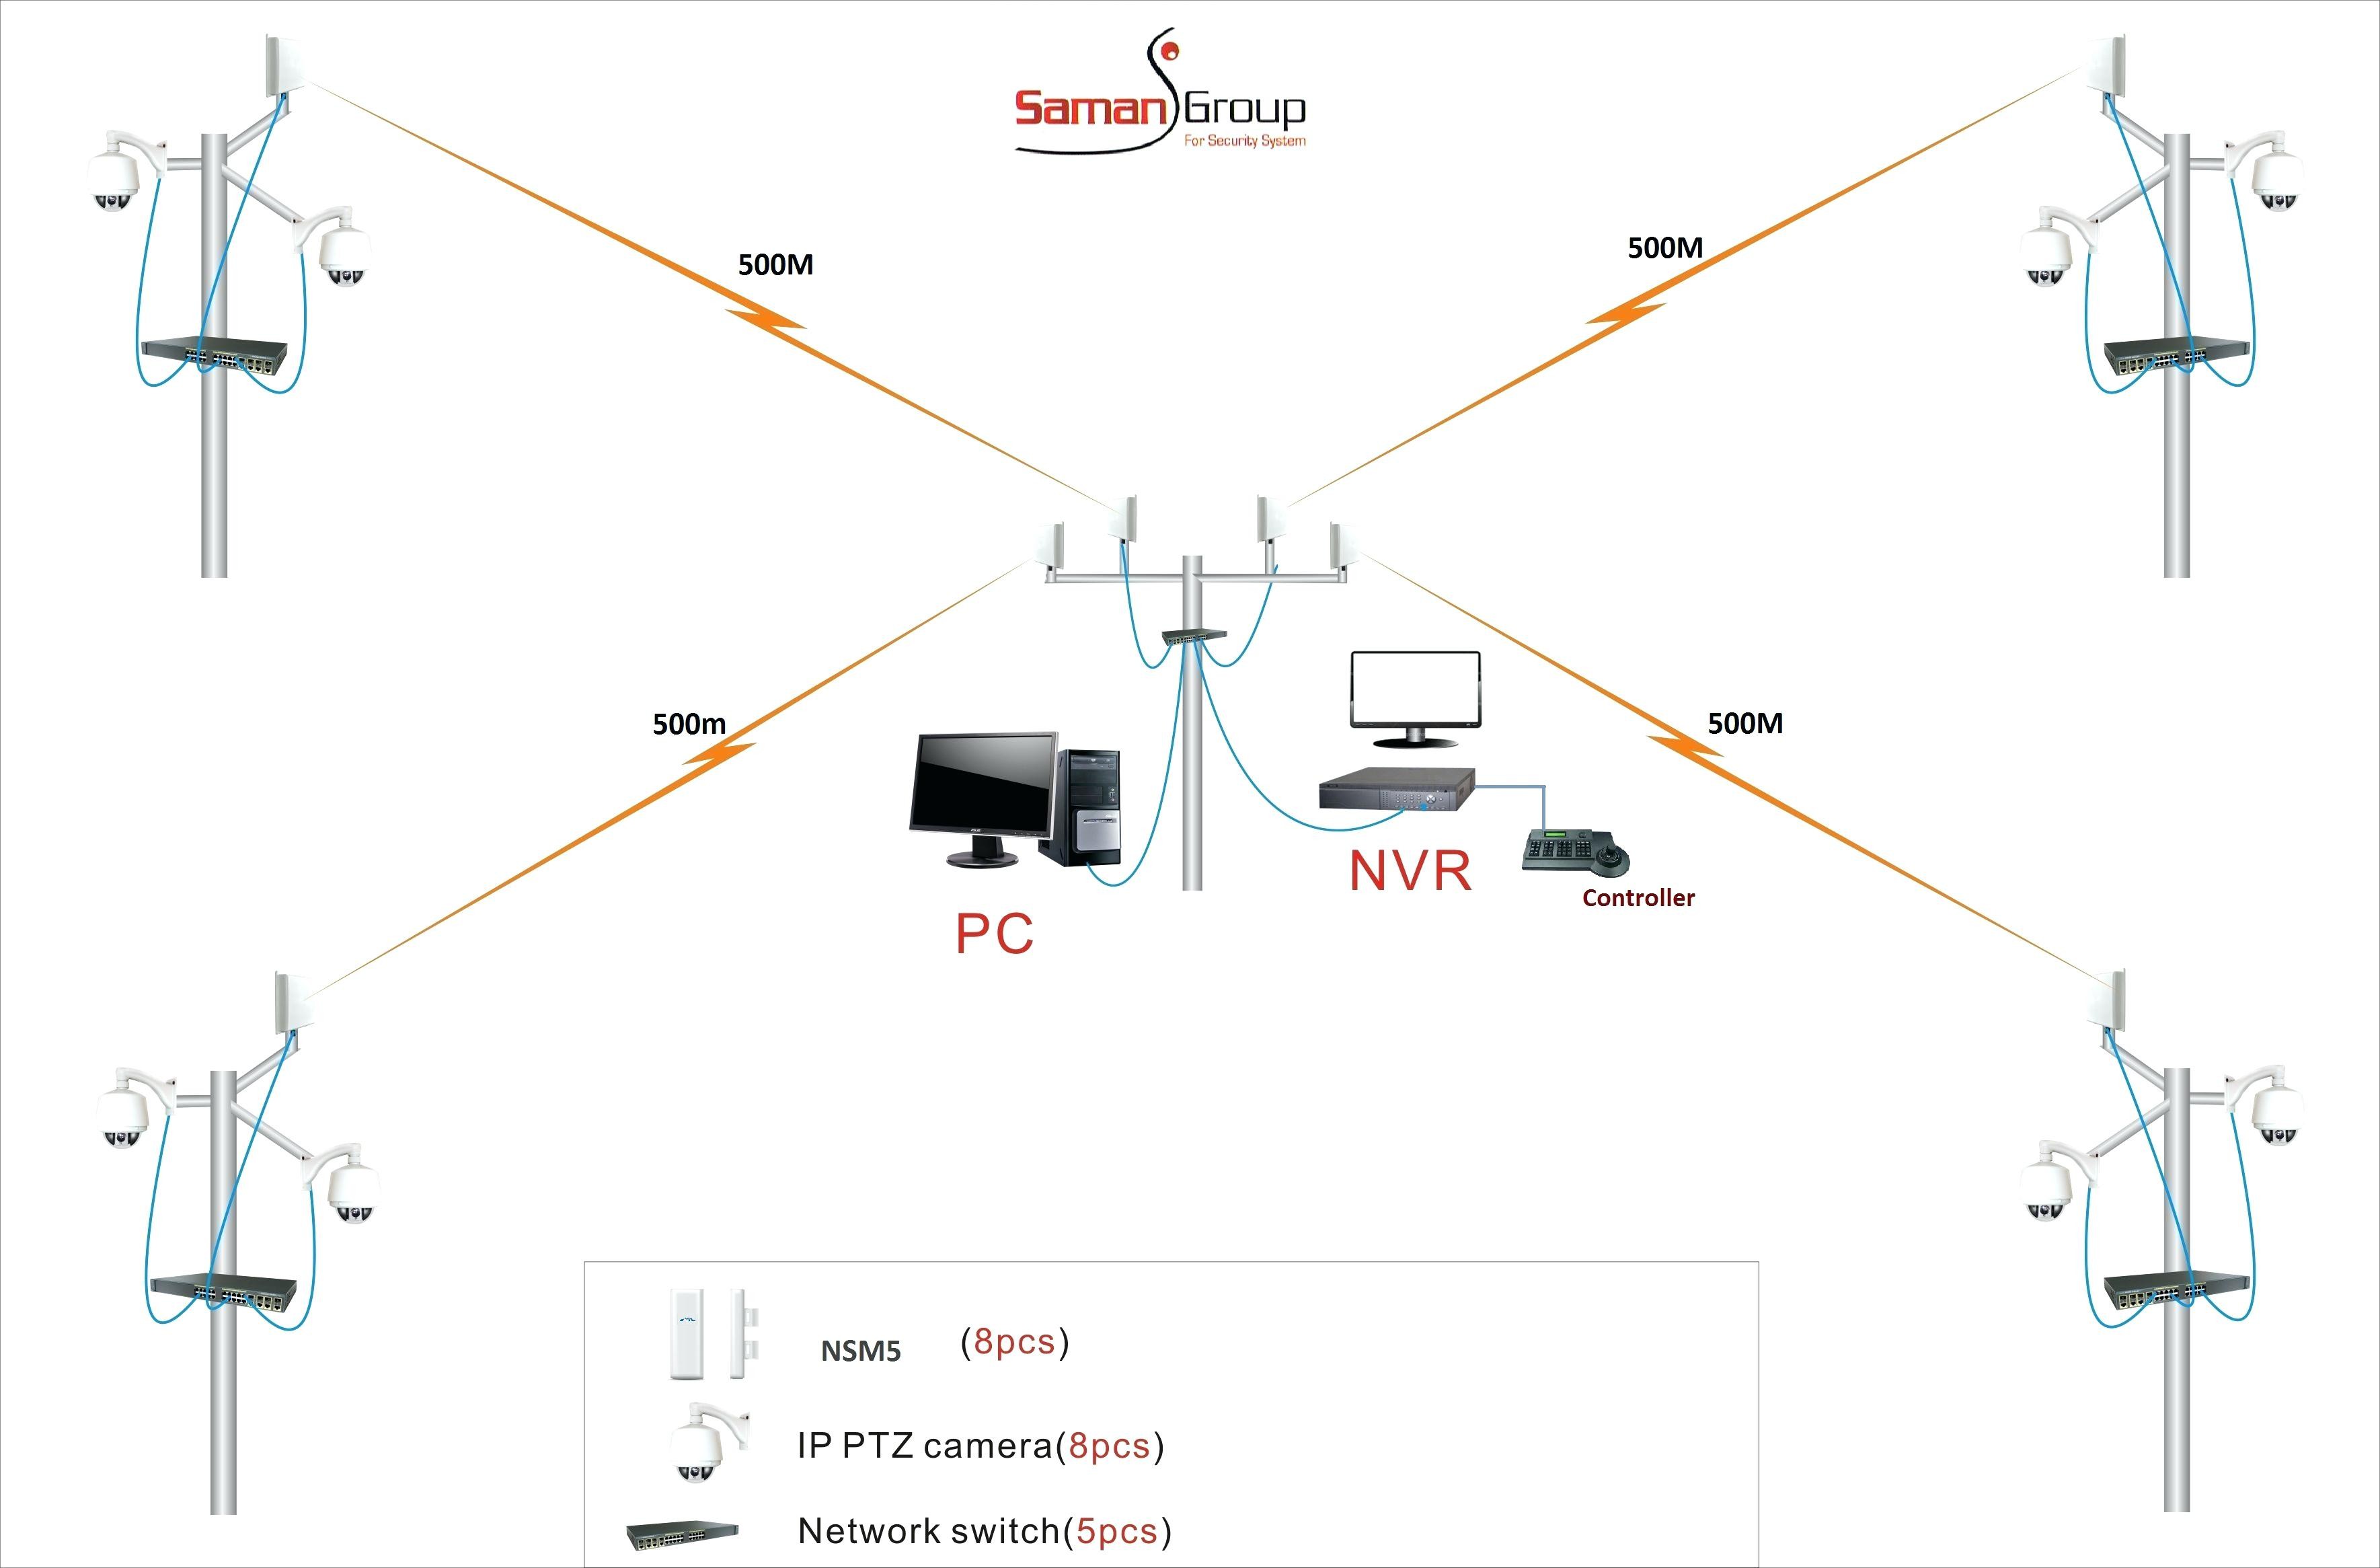 Full Size of Lorex Security Camera Wiring Diagram Wireless Solution Cameras Networks munity Electrical Wire Symbols